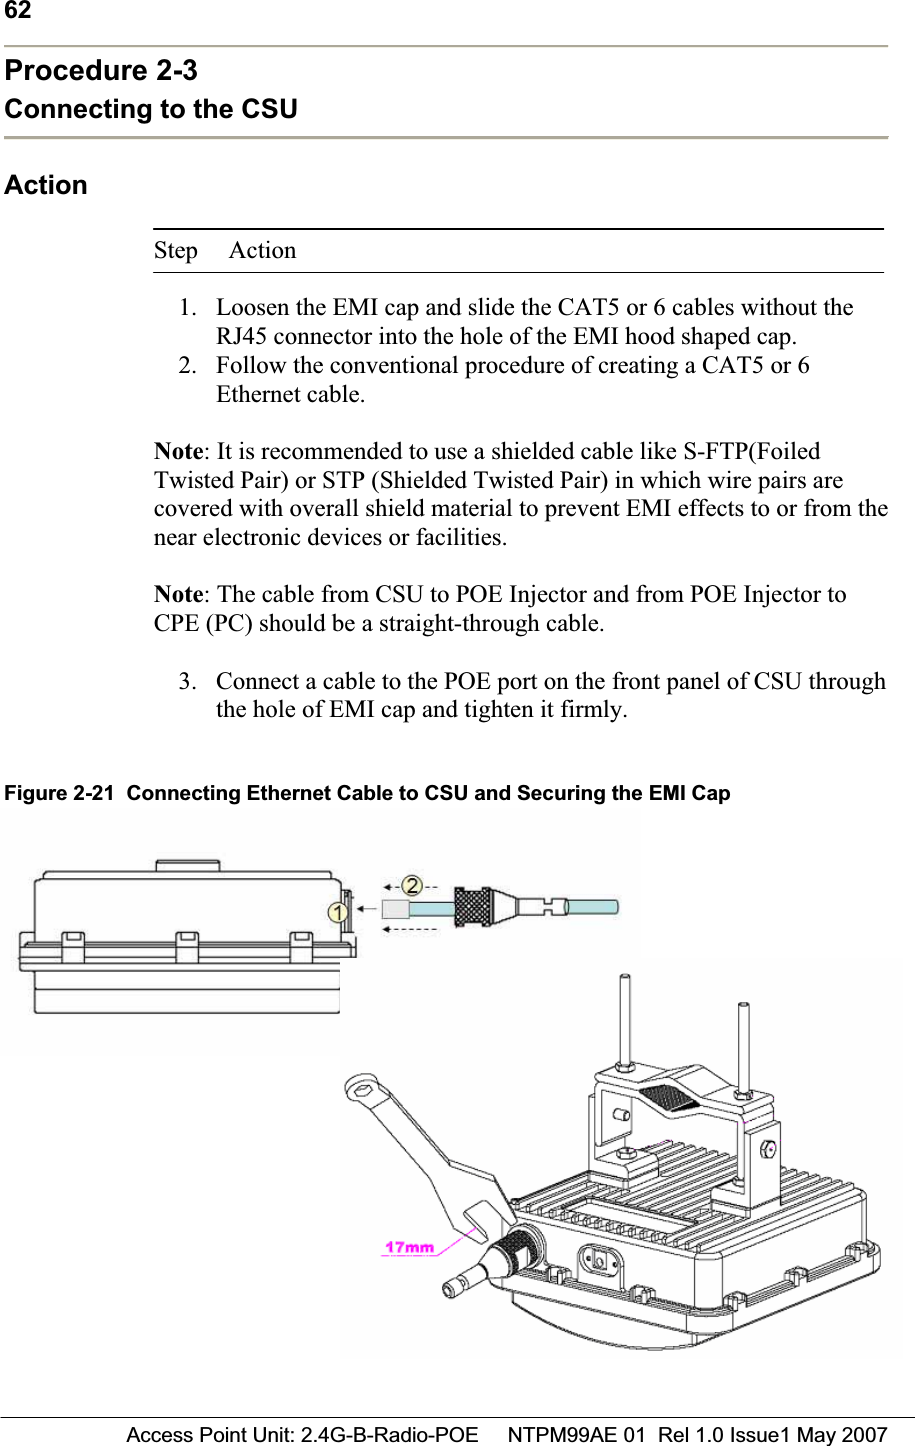 62 Access Point Unit: 2.4G-B-Radio-POE     NTPM99AE 01  Rel 1.0 Issue1 May 2007Procedure 2-3 Connecting to the CSU ActionStep Action 1. Loosen the EMI cap and slide the CAT5 or 6 cables without the RJ45 connector into the hole of the EMI hood shaped cap. 2. Follow the conventional procedure of creating a CAT5 or 6 Ethernet cable. Note: It is recommended to use a shielded cable like S-FTP(Foiled Twisted Pair) or STP (Shielded Twisted Pair) in which wire pairs are covered with overall shield material to prevent EMI effects to or from the near electronic devices or facilities.Note: The cable from CSU to POE Injector and from POE Injector to CPE (PC) should be a straight-through cable.3. Connect a cable to the POE port on the front panel of CSU through the hole of EMI cap and tighten it firmly. Figure 2-21  Connecting Ethernet Cable to CSU and Securing the EMI Cap 